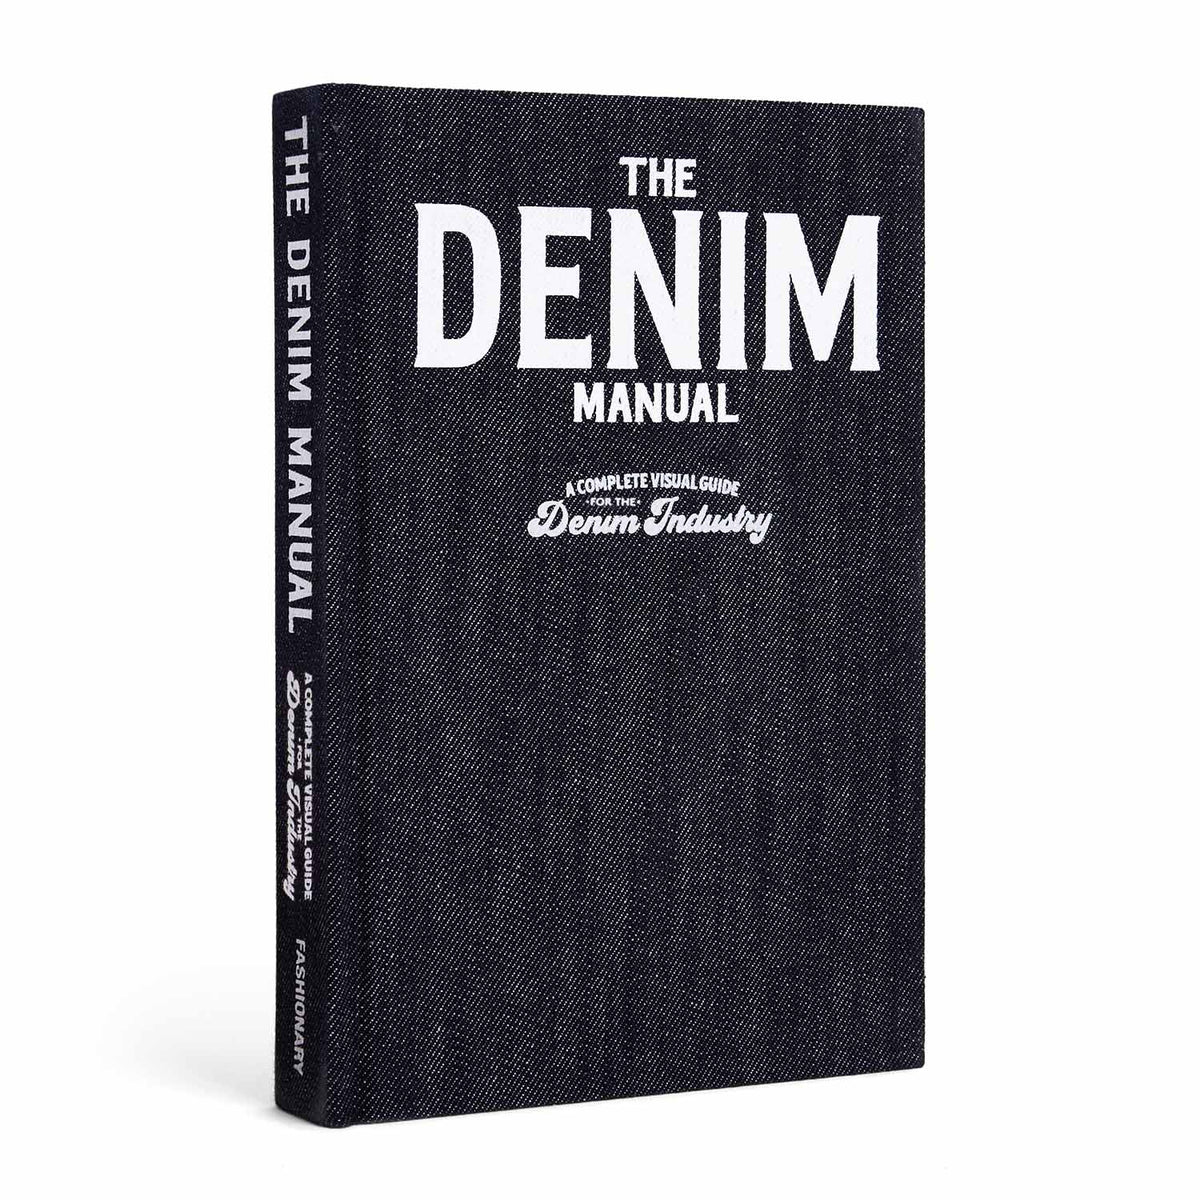 The Denim Manual, a complete visual guide for the denim industry - Fashionary